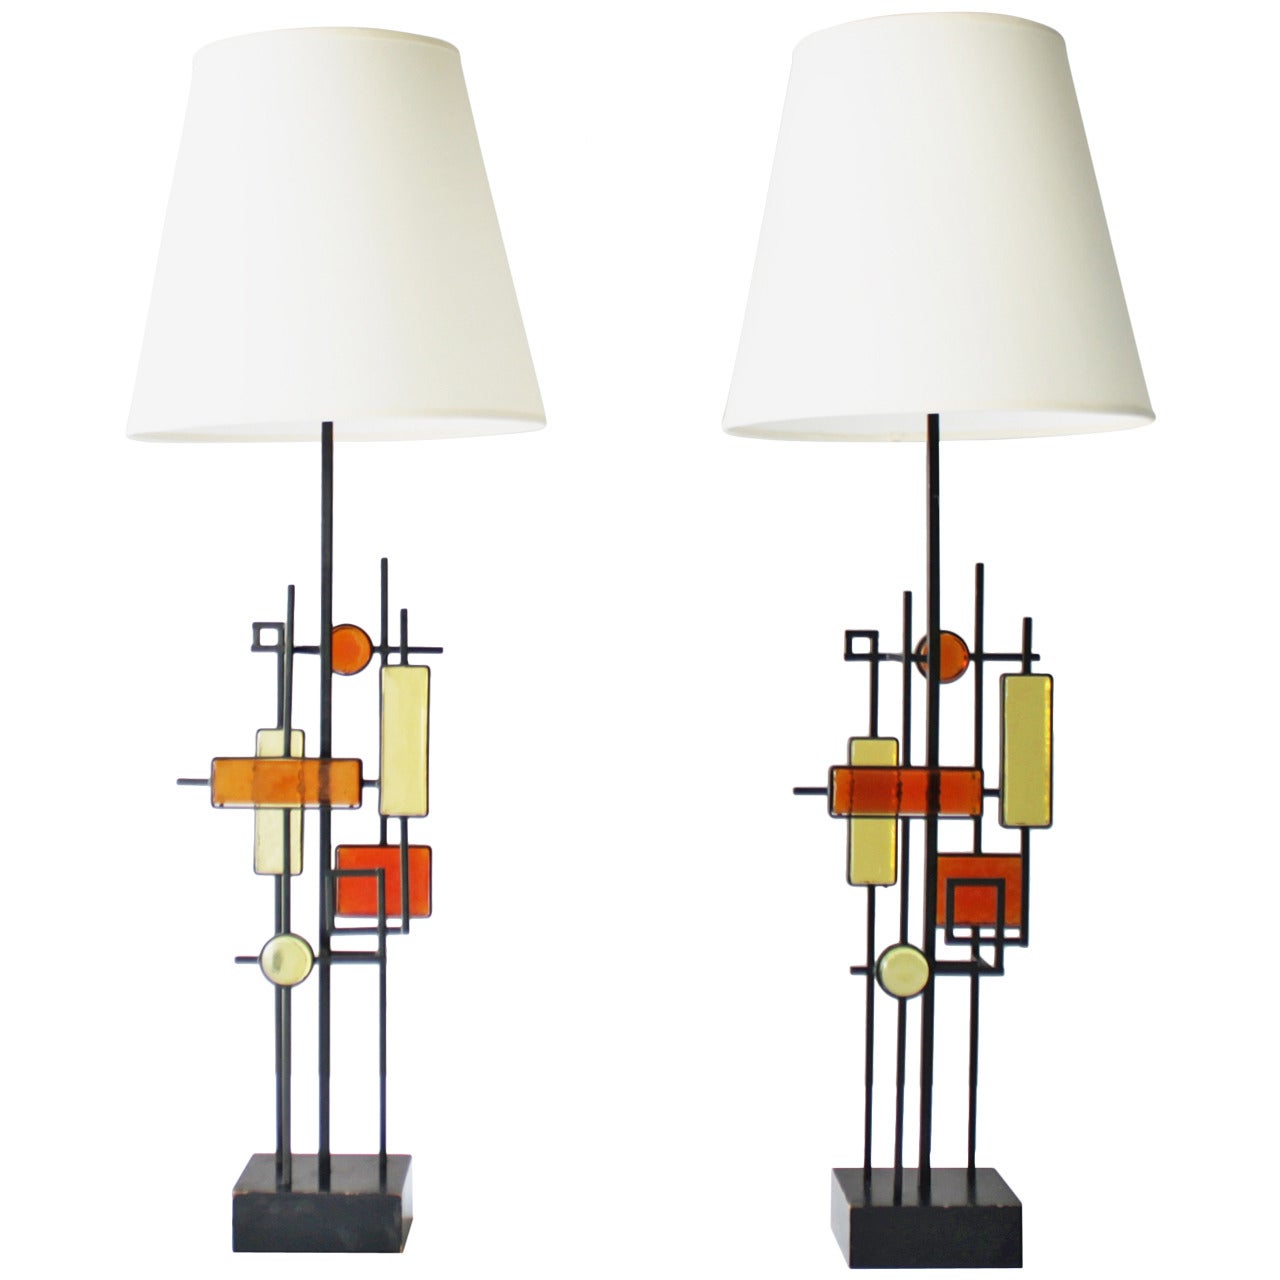 Pair of Lamps by Svend Aage Holm Sorensen